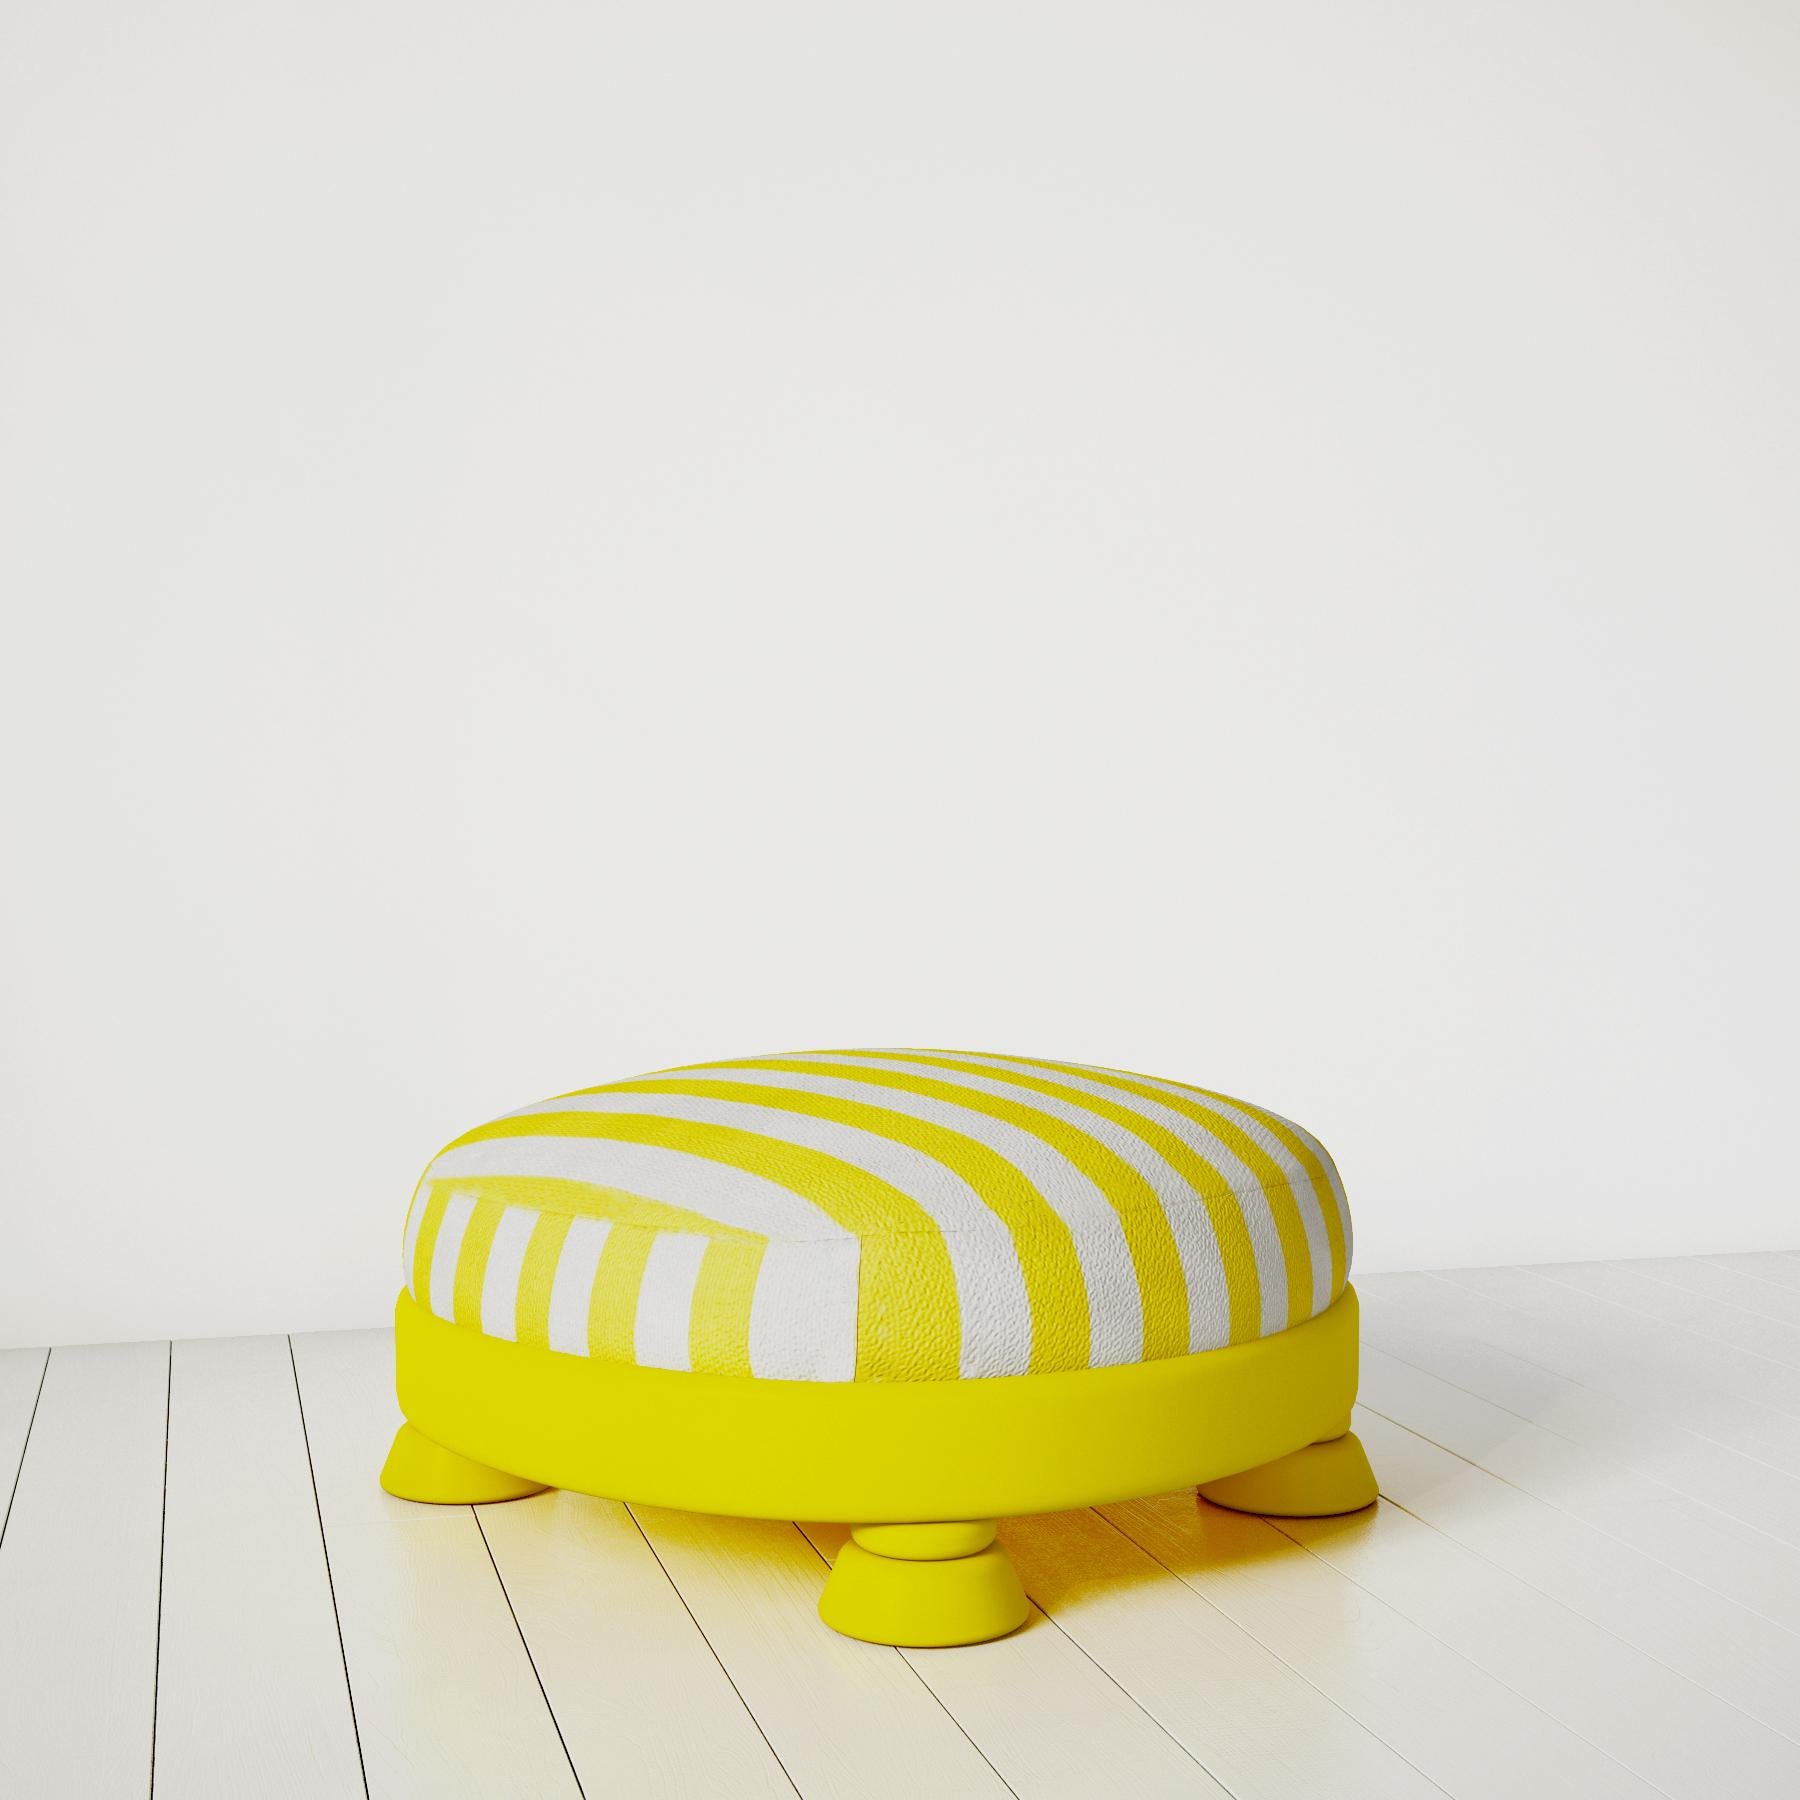 Overview:
Brighten up any room with the Yellow Mellow Pouf, a cheerful and stylish addition that blends the whimsy of neotenic design with the sophistication of postmodern style. This ottoman is perfect for adding a pop of color and a playful touch